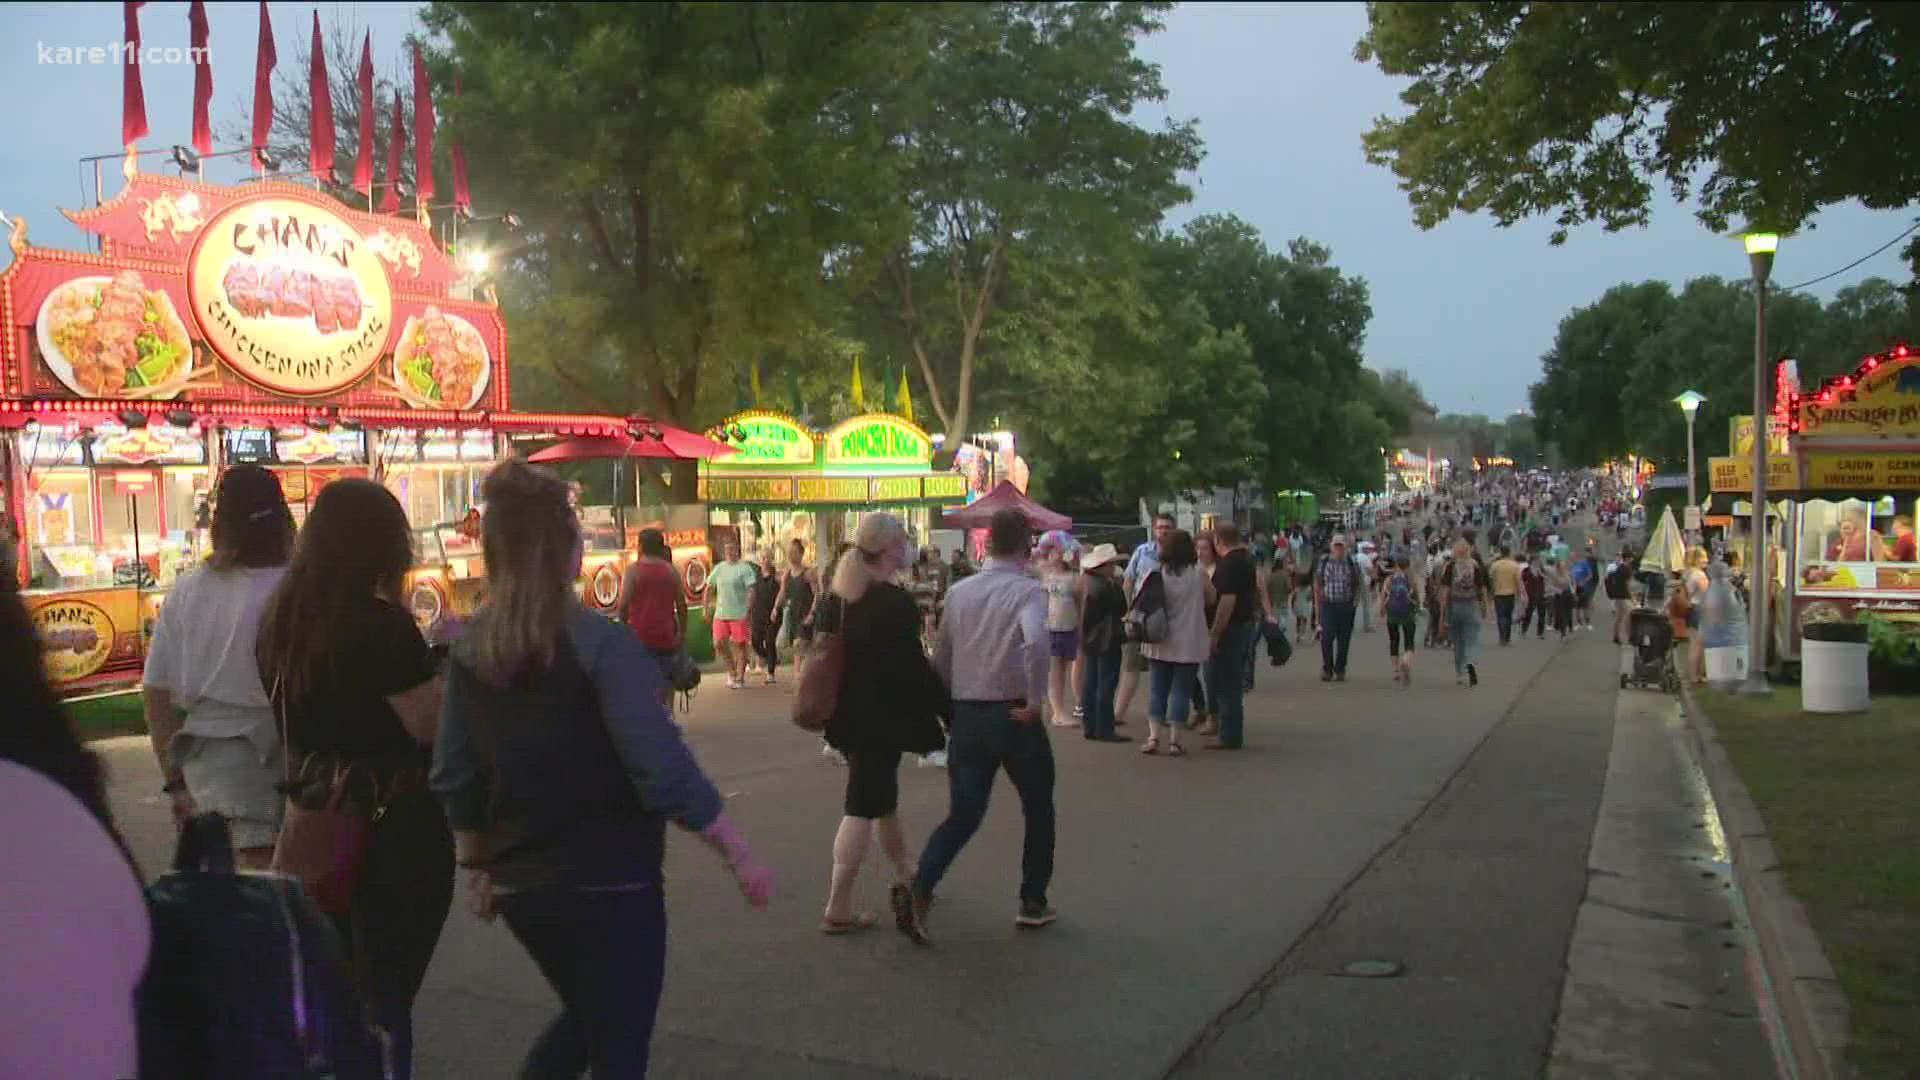 Rain and storms shifted plans at the fairgrounds throughout Saturday